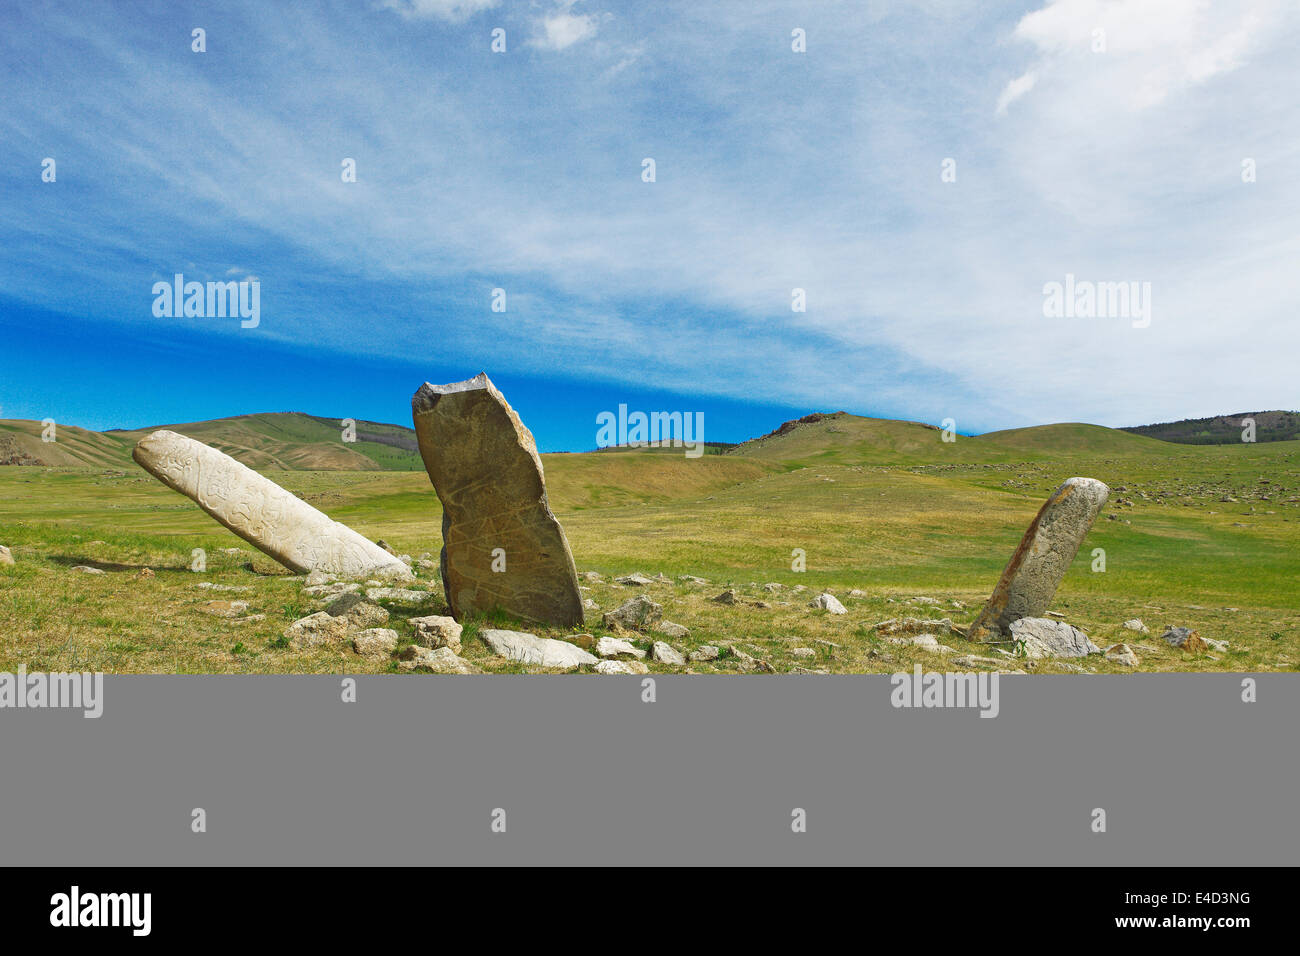 Deer stones, Stone Age burial sites, Hustai National Park, also Khustain Nuruu National Park, Southern Steppe Stock Photo